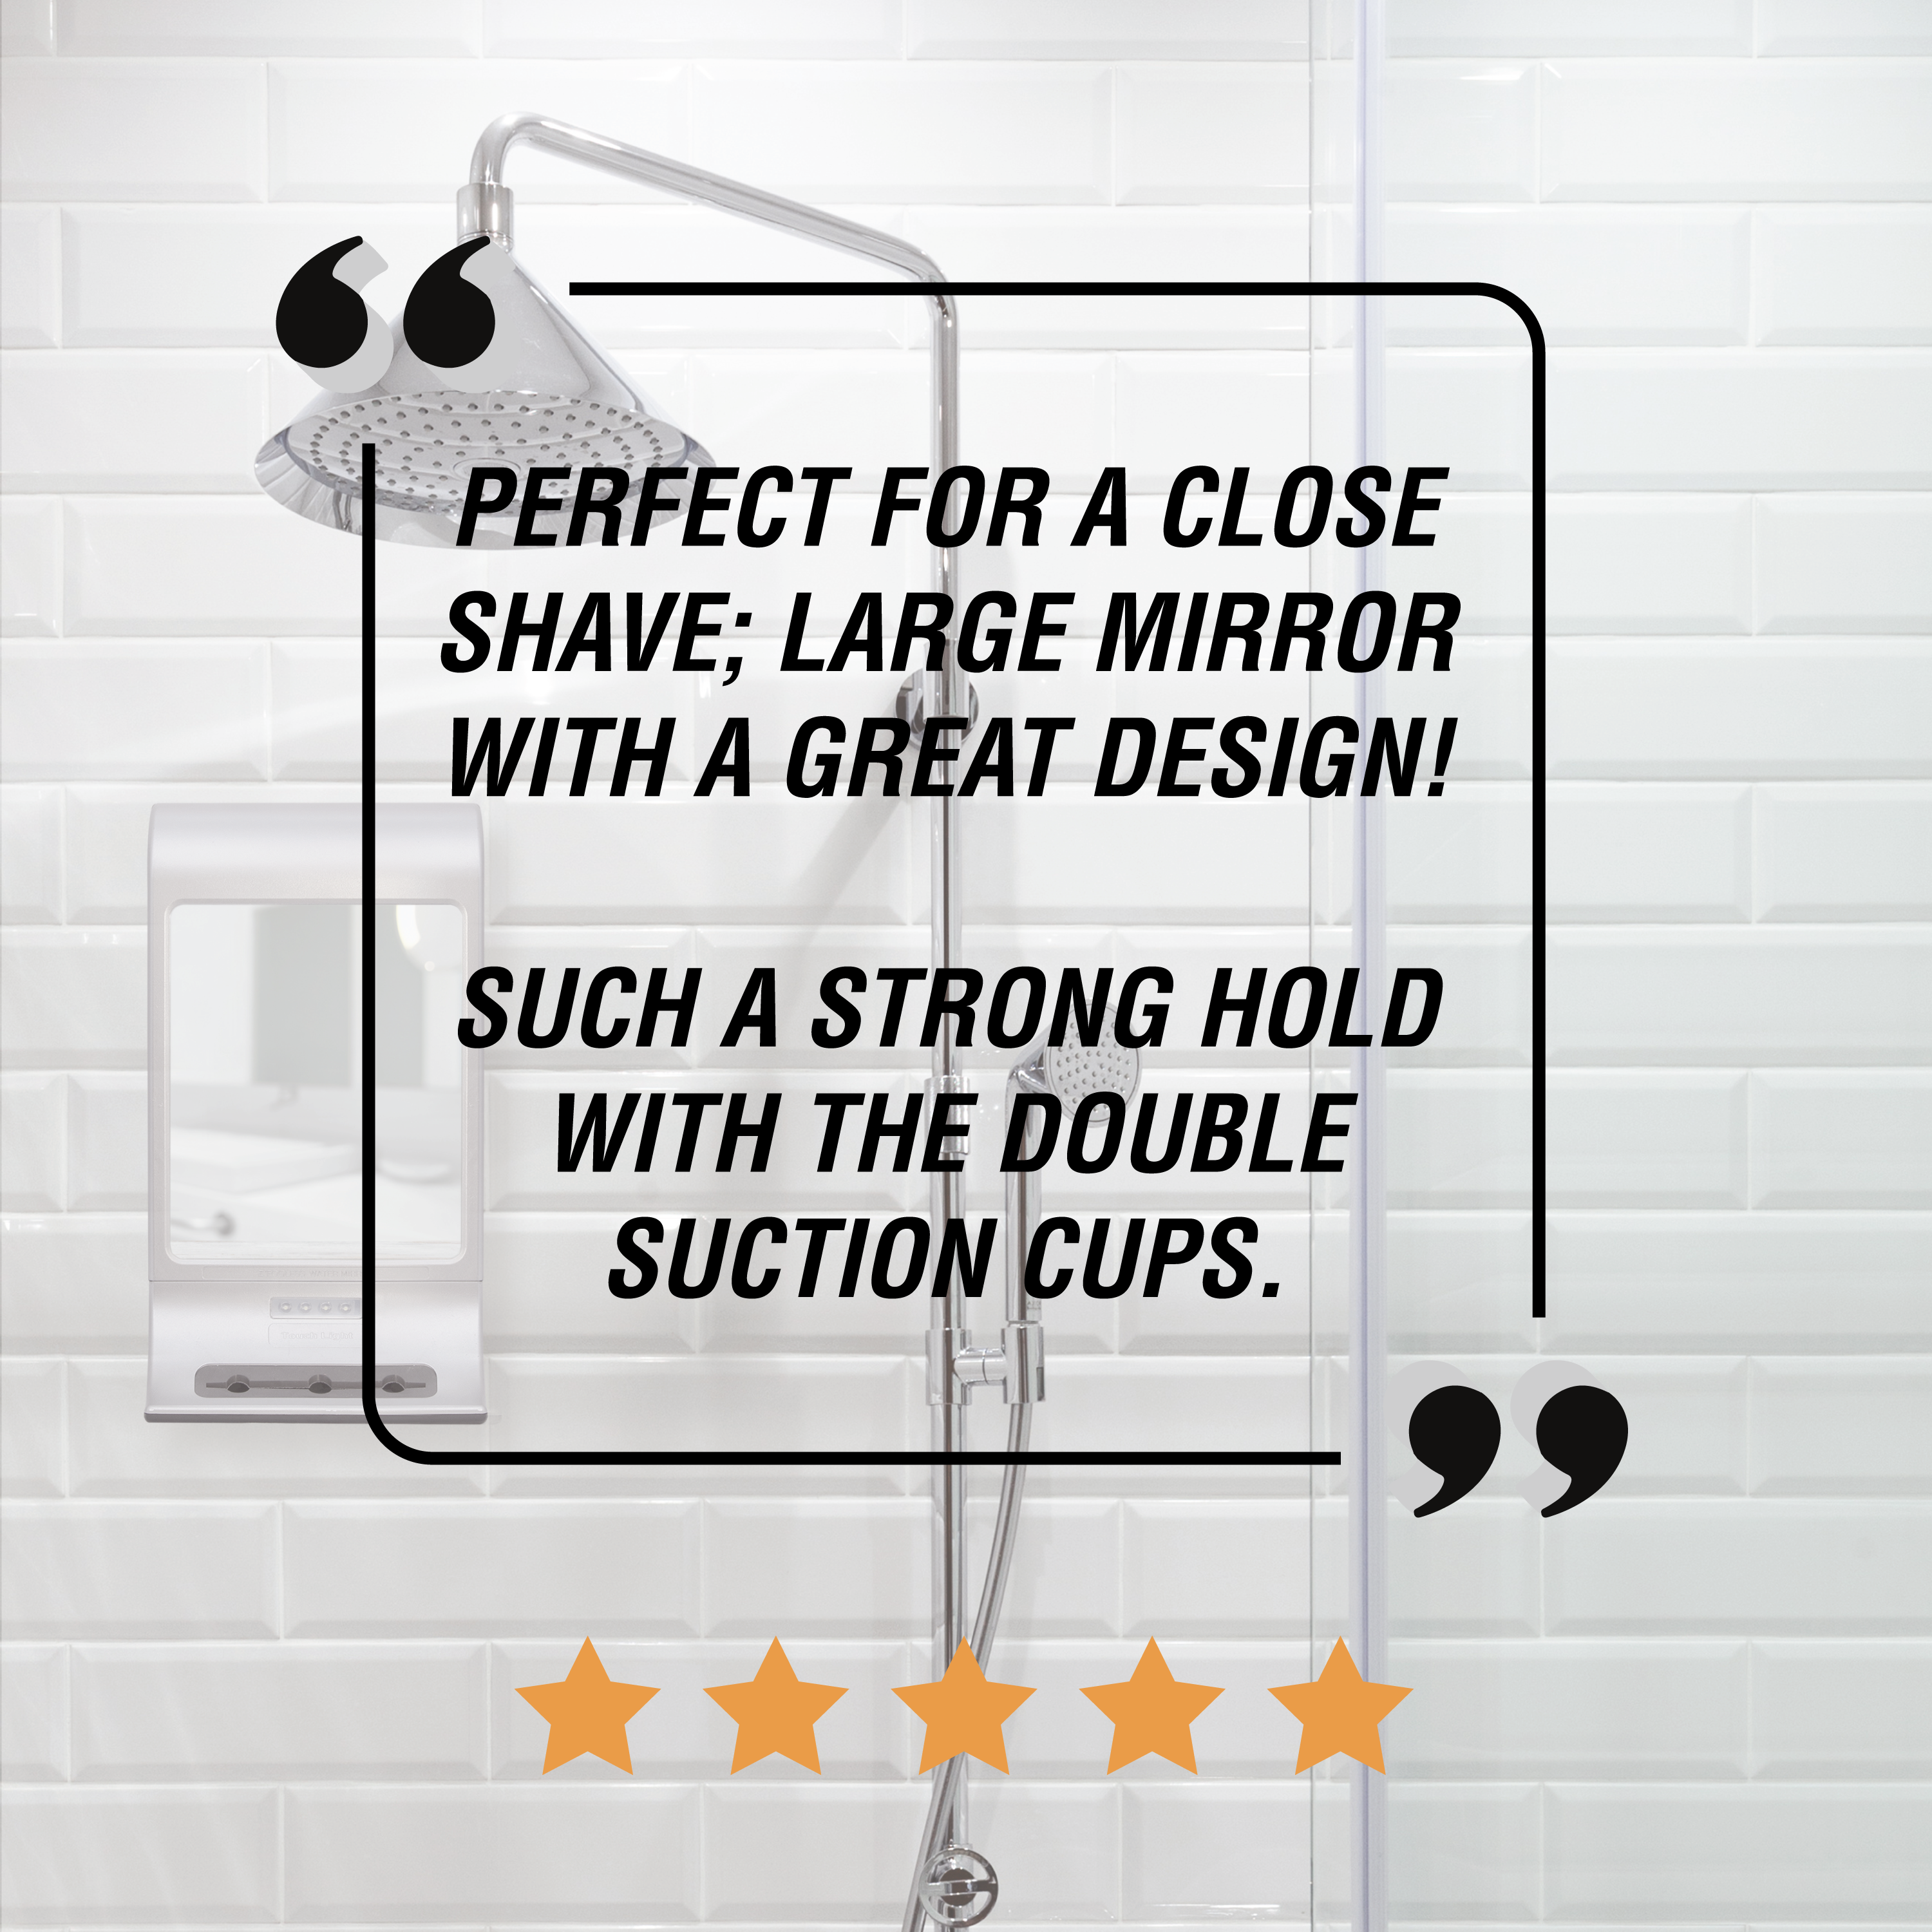 Fogless Lighted Shower Mirror with Suction Cup Mounting & Squeegee